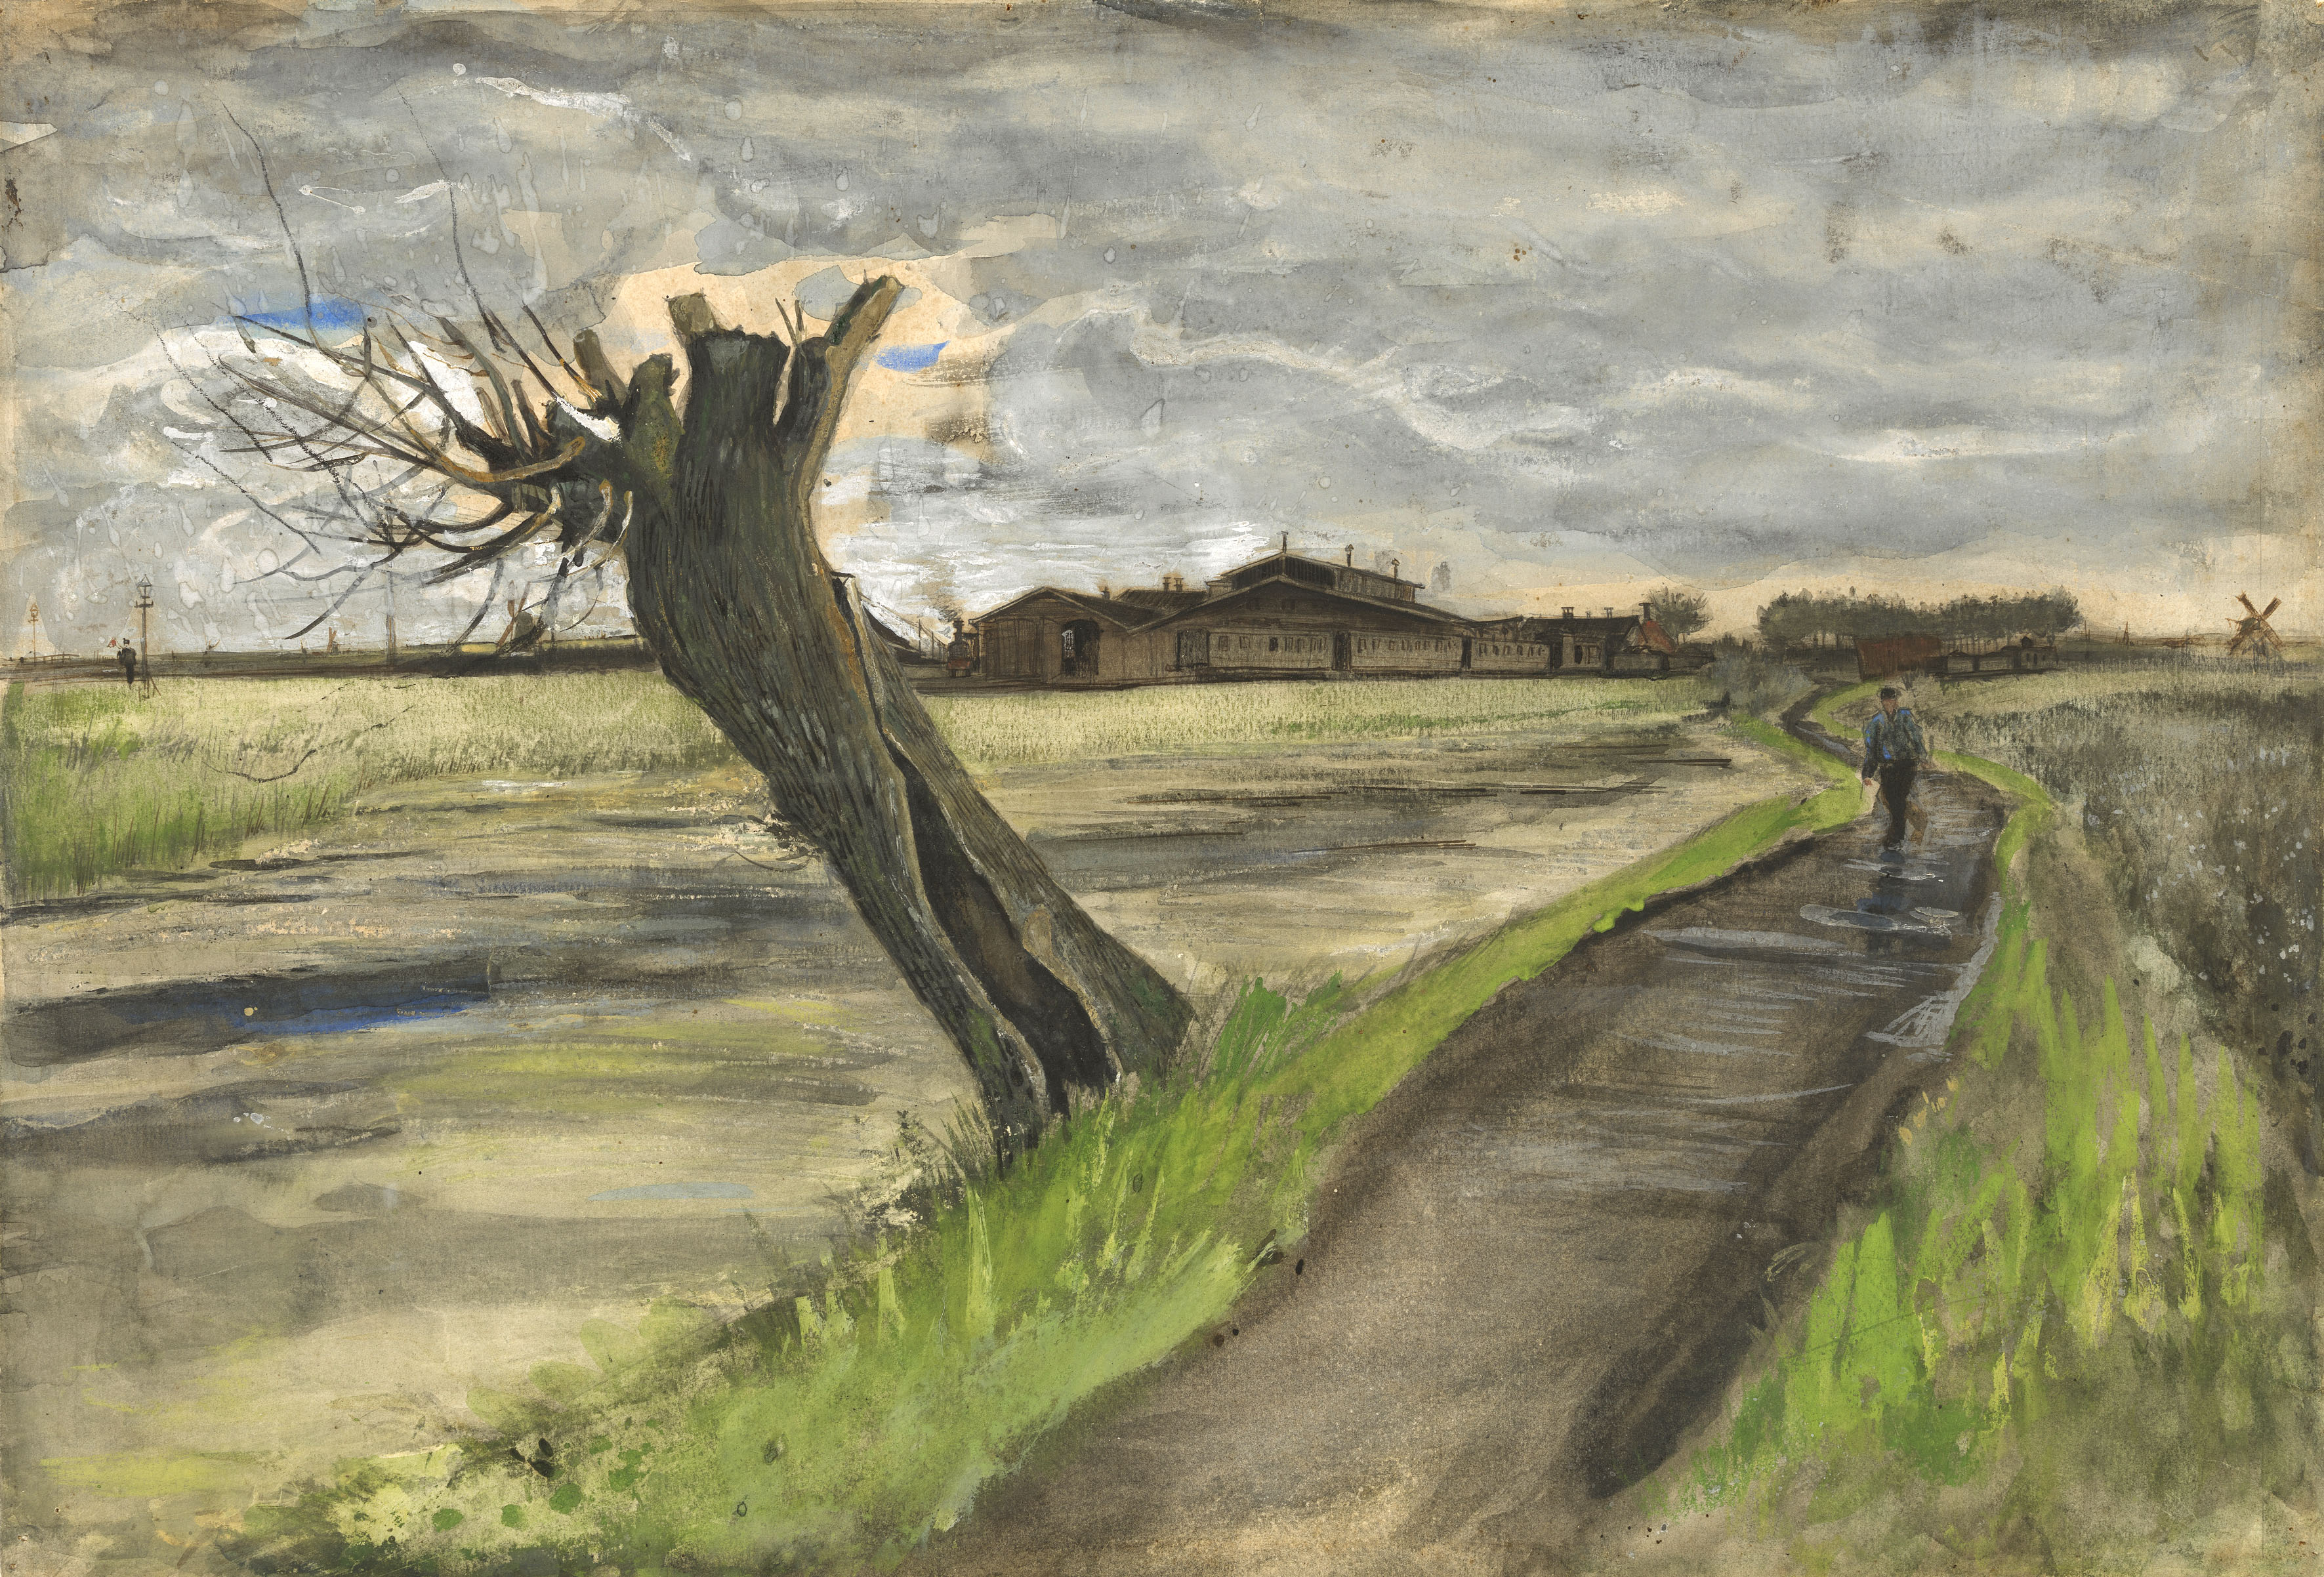 Museum unveils watercolor from Van Gogh's youth - CBS News